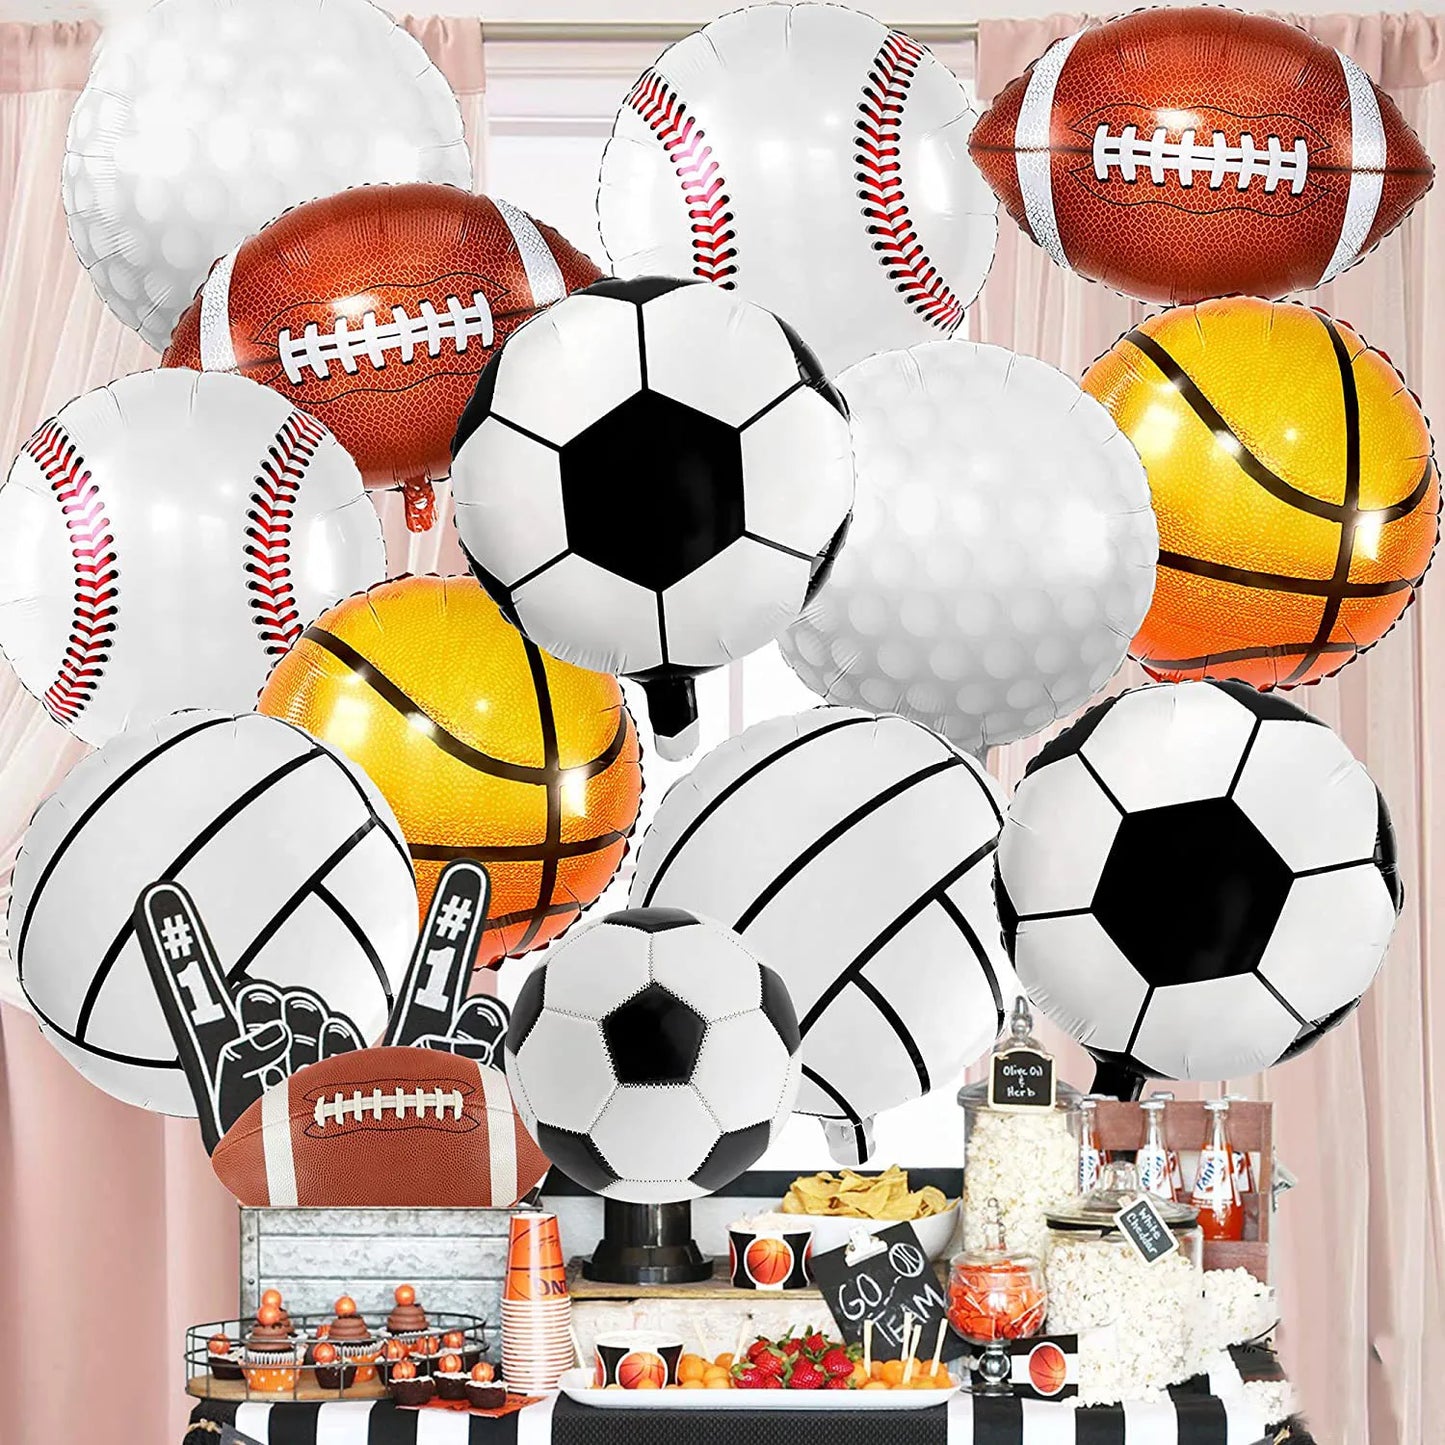 1PC 18inch Football Balloons Basketball Volleyball Bowling Golf Foil Ballons Kids Boy Baloons Toys Birthday Party Decorations